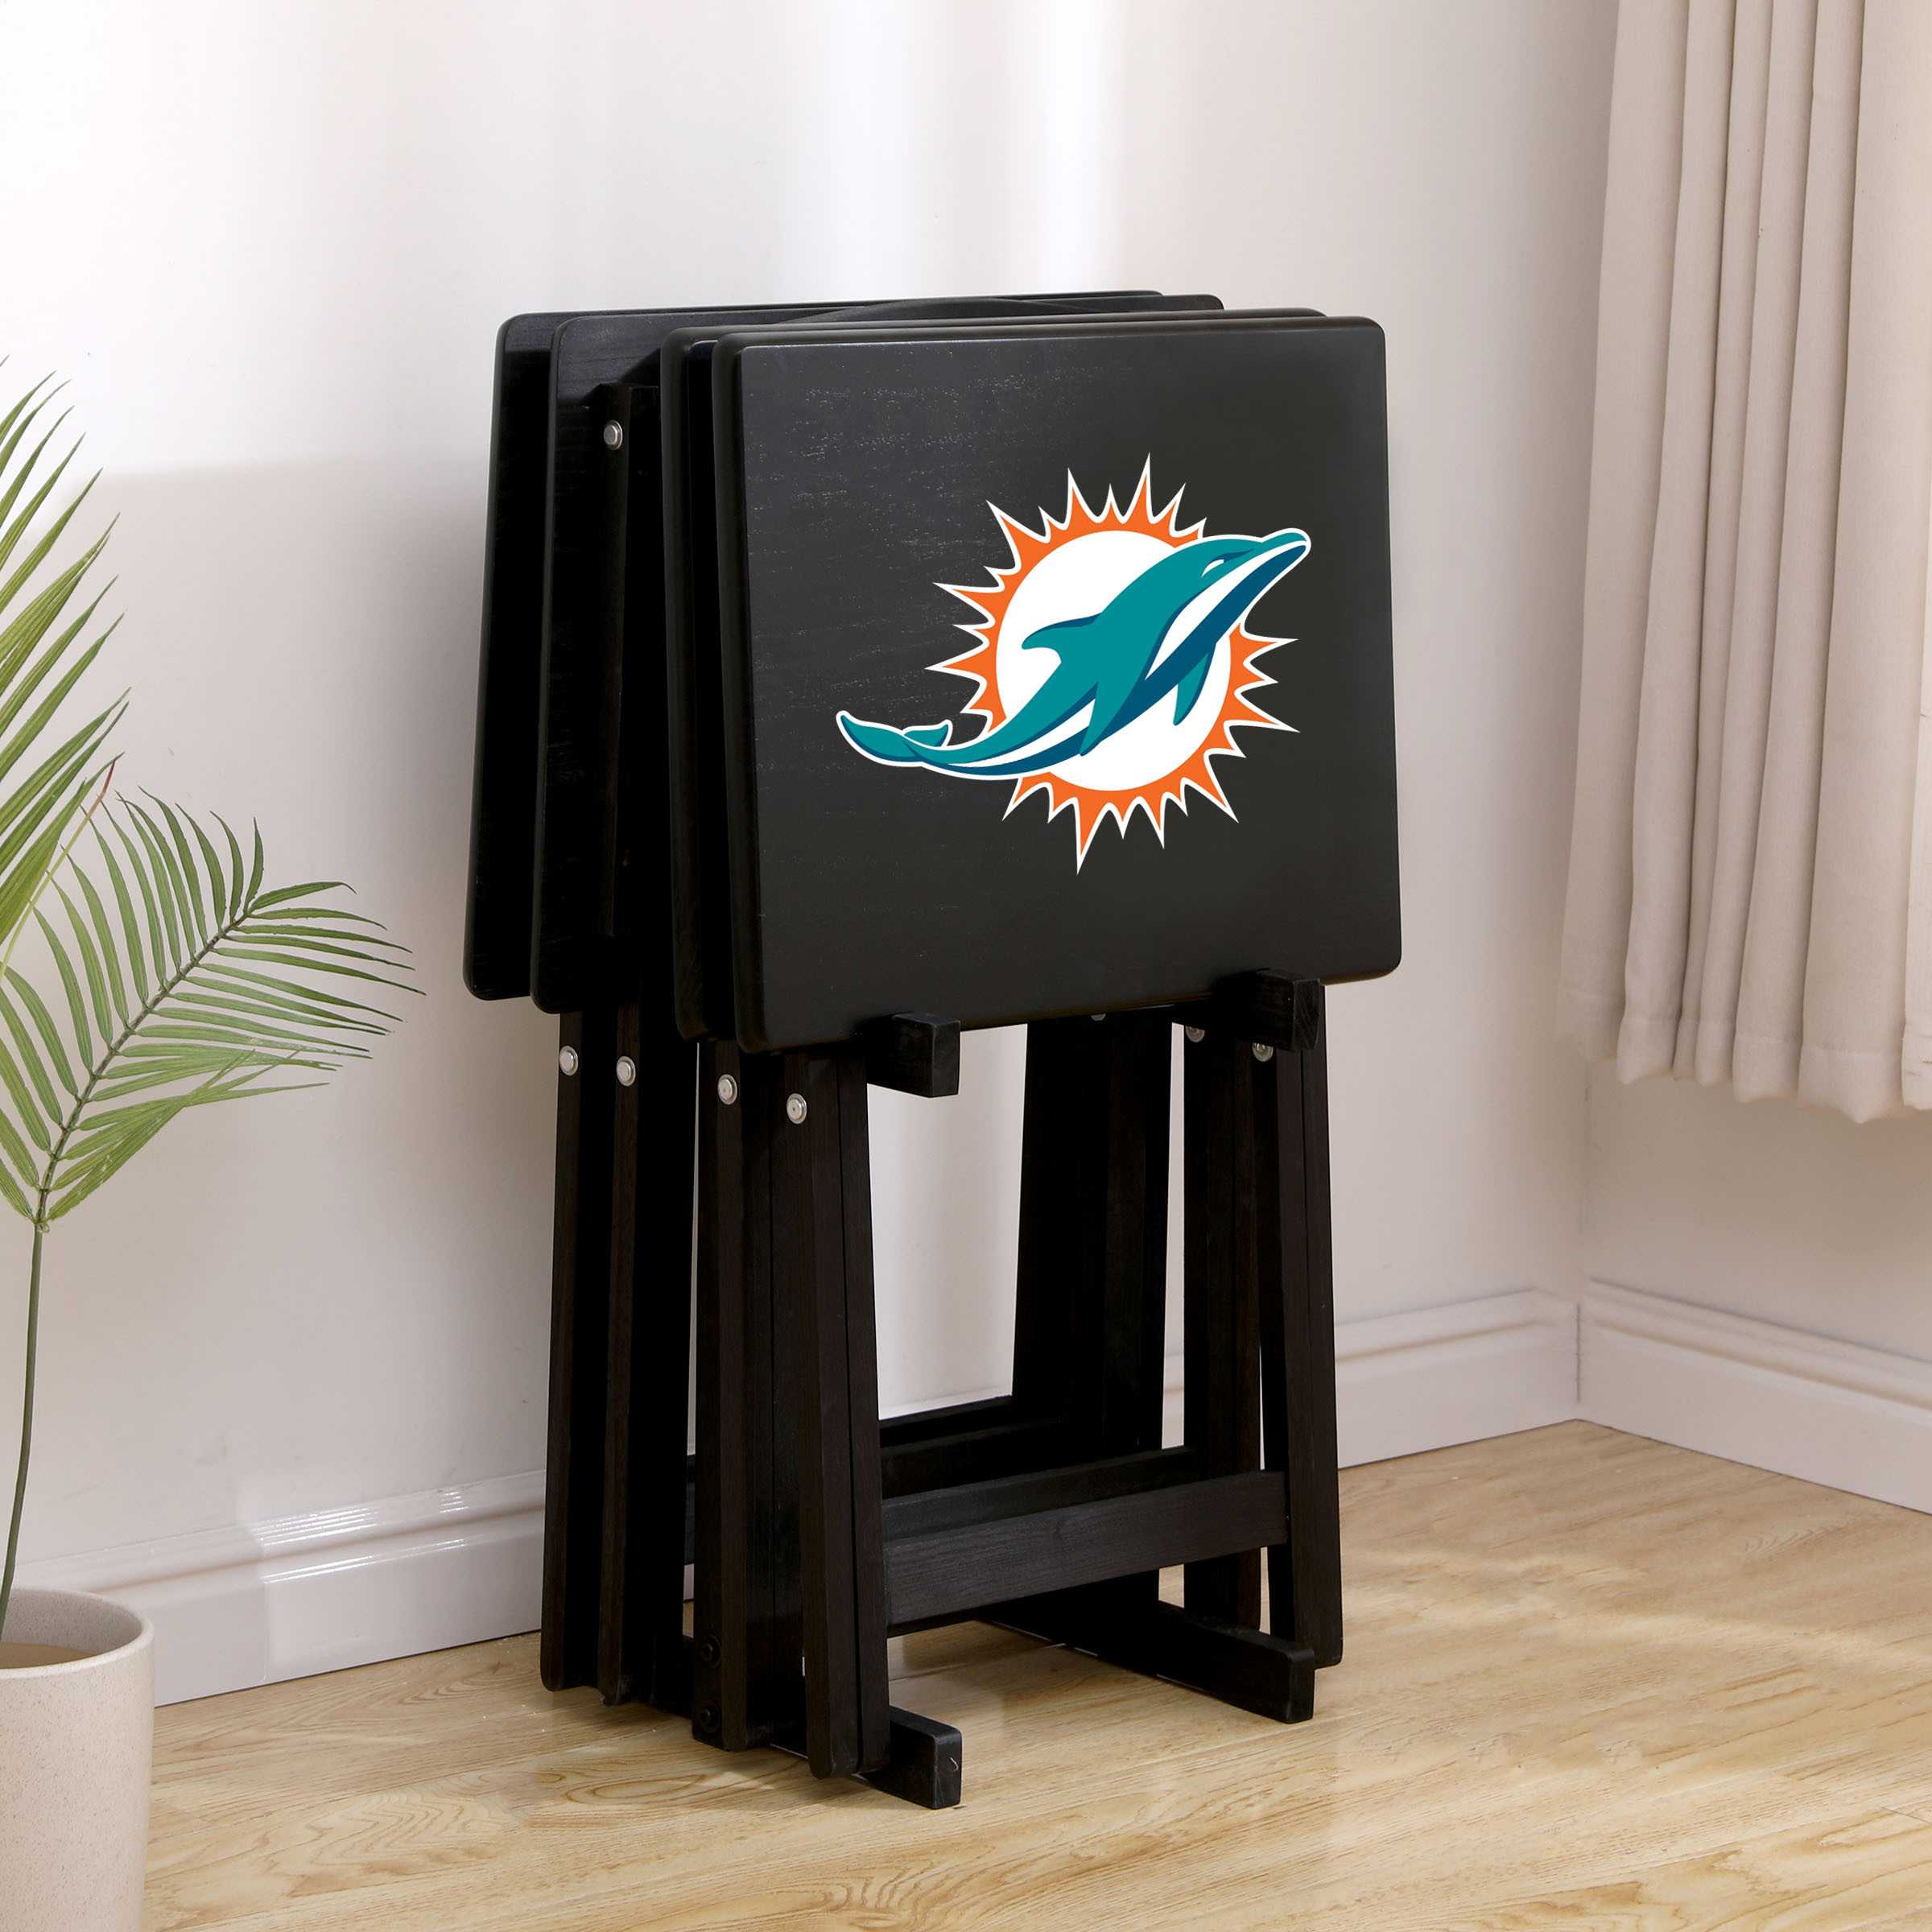 MIAMI DOLPHINS TV TRAYS WITH STAND